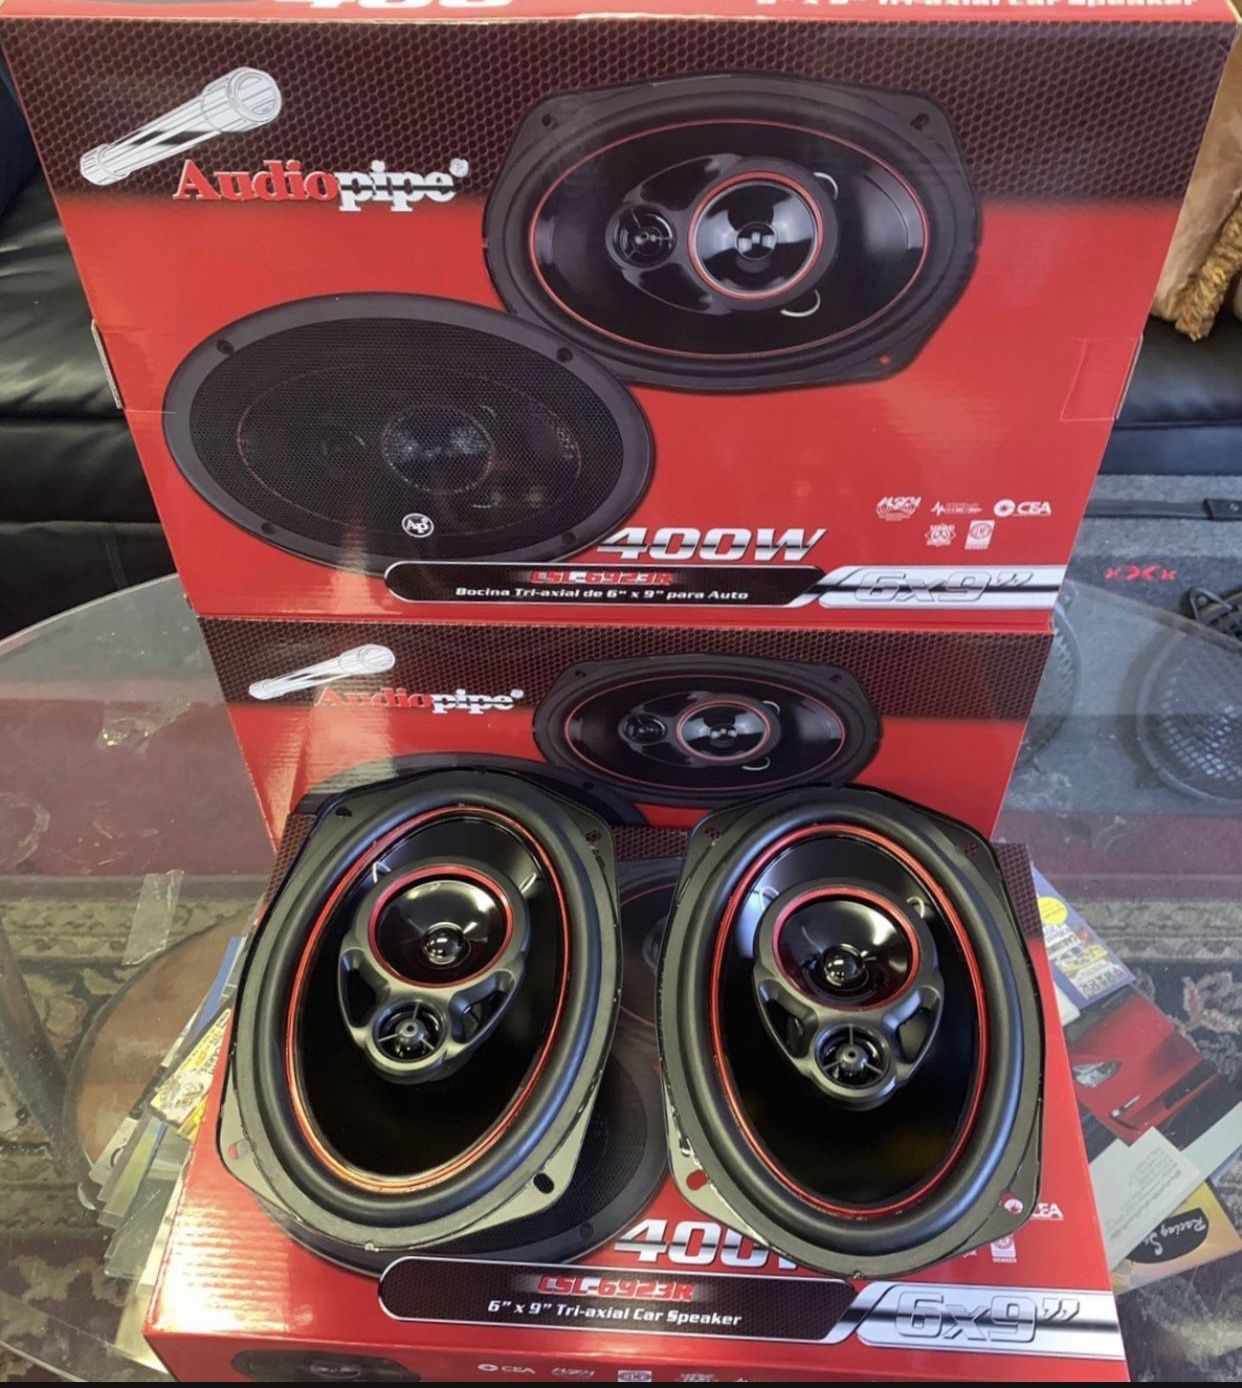 Audiopipe Car Audio . 6x9 Car Stereo Speakers . 400 watts . New Years Super Sale $40 A Pair While They Last . New